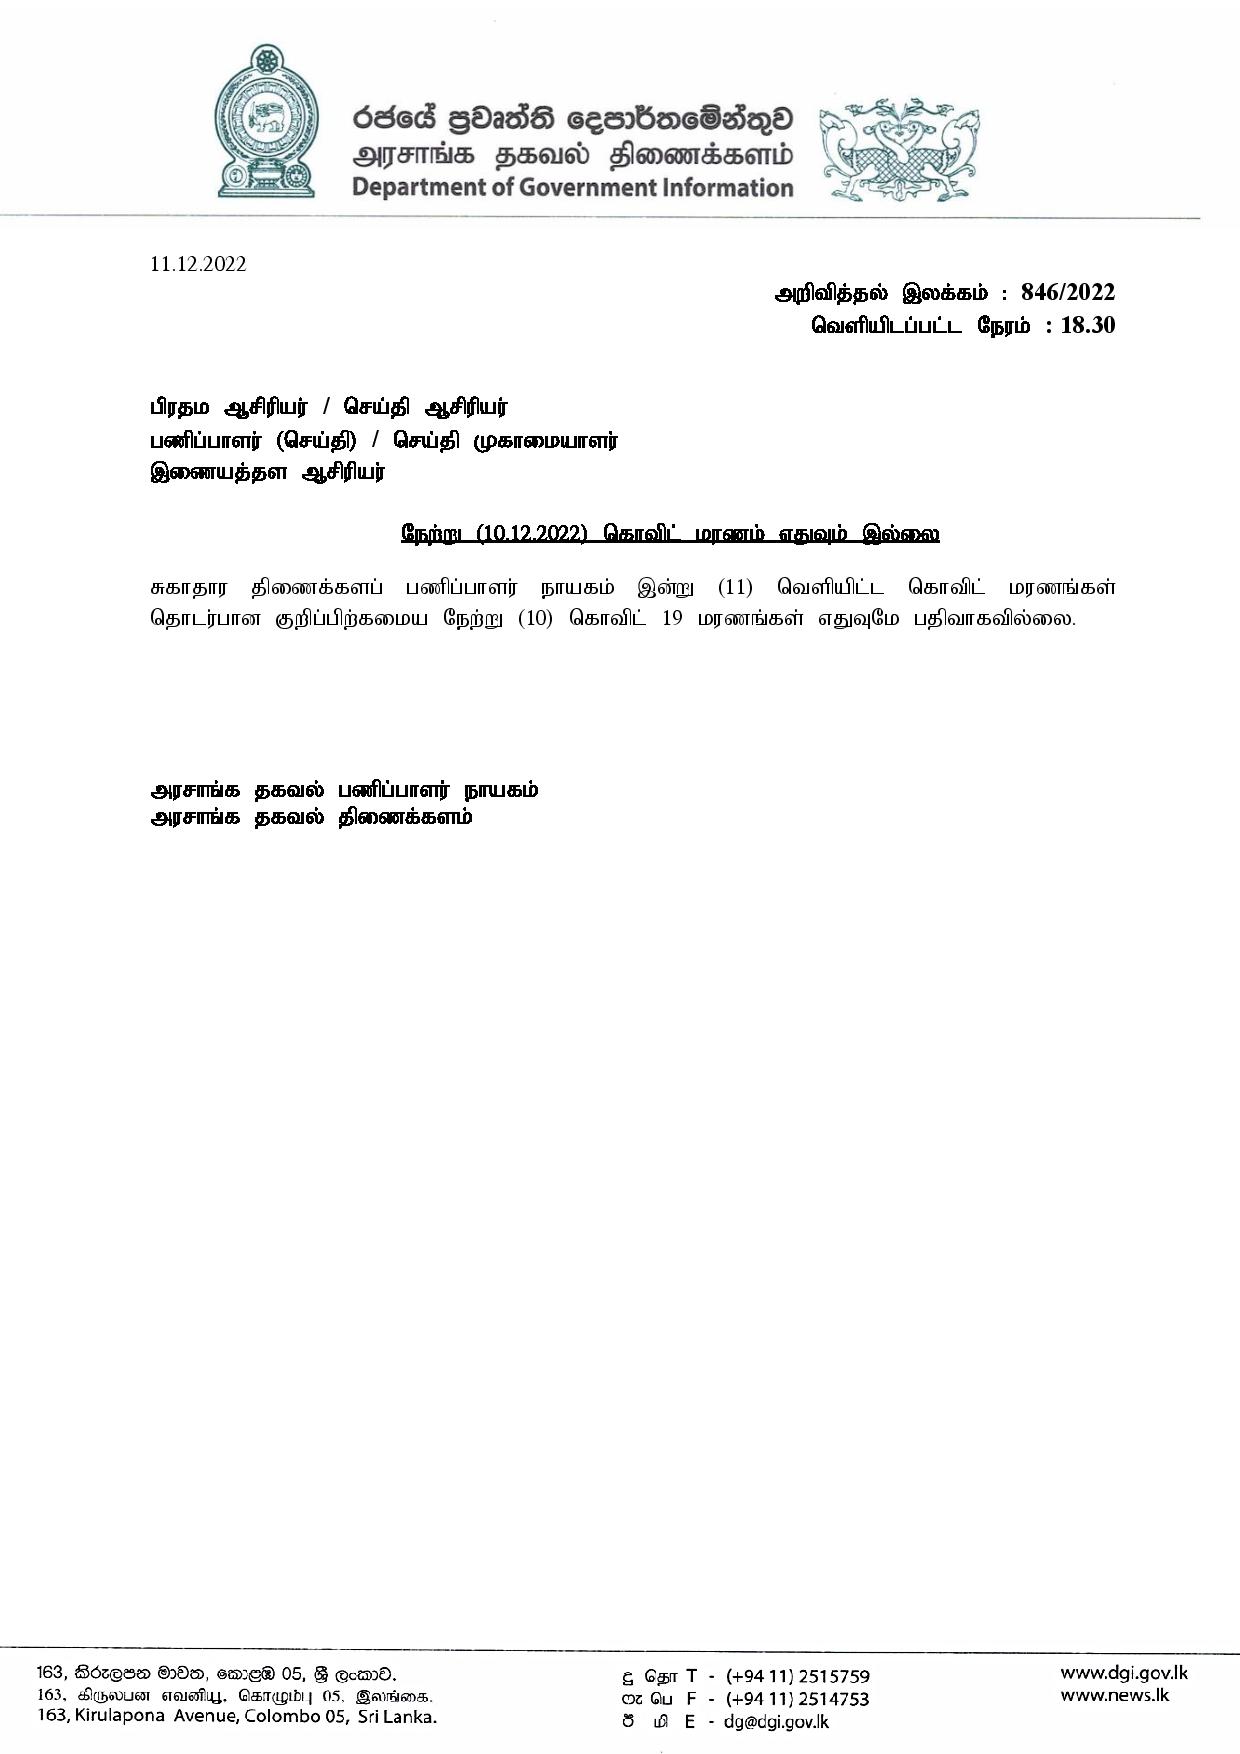 Release No0 846 Tamil page 001